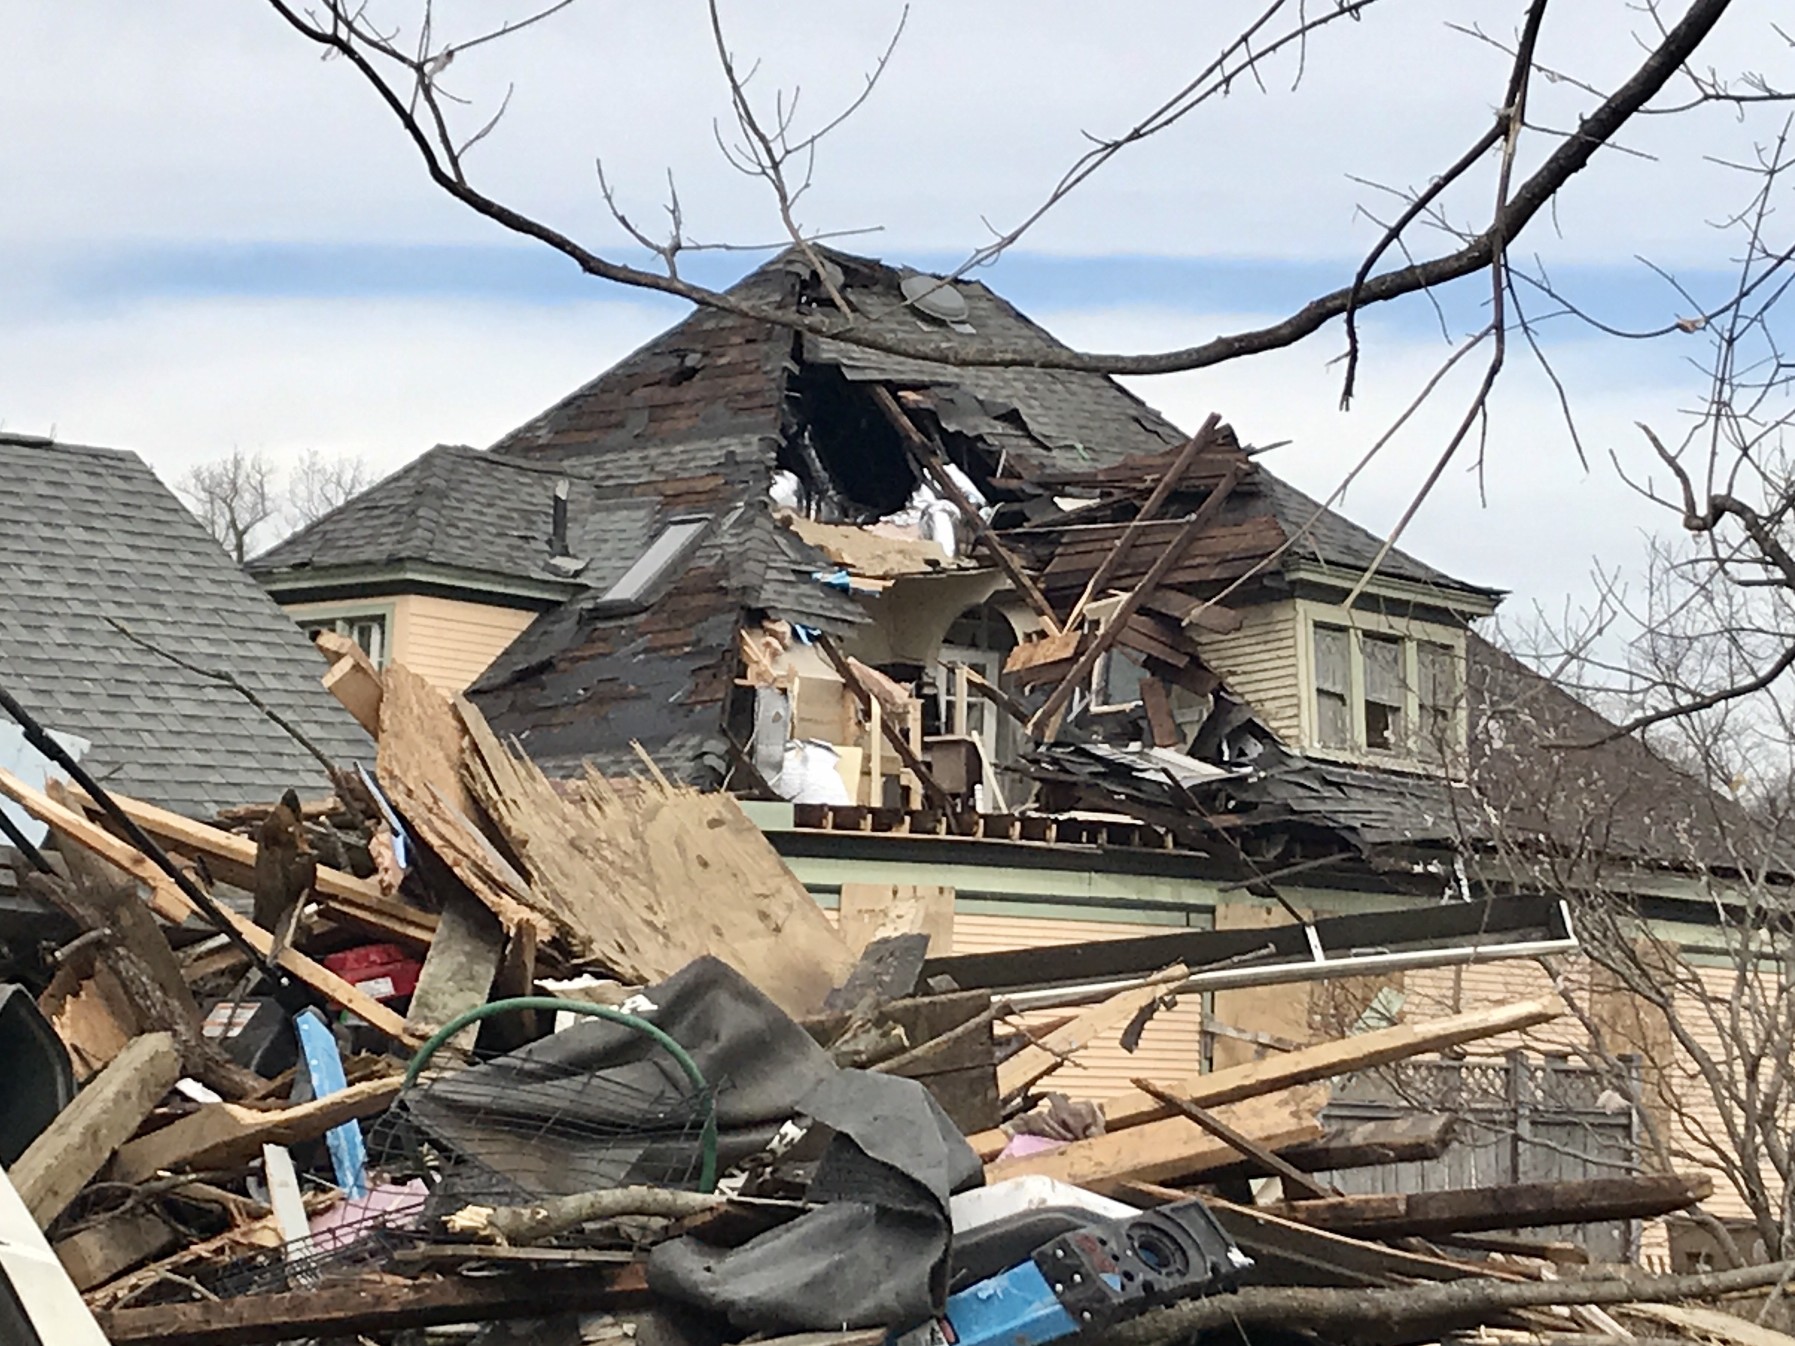 a-house-with-severe-tornado-damage_t20_aaWEvp